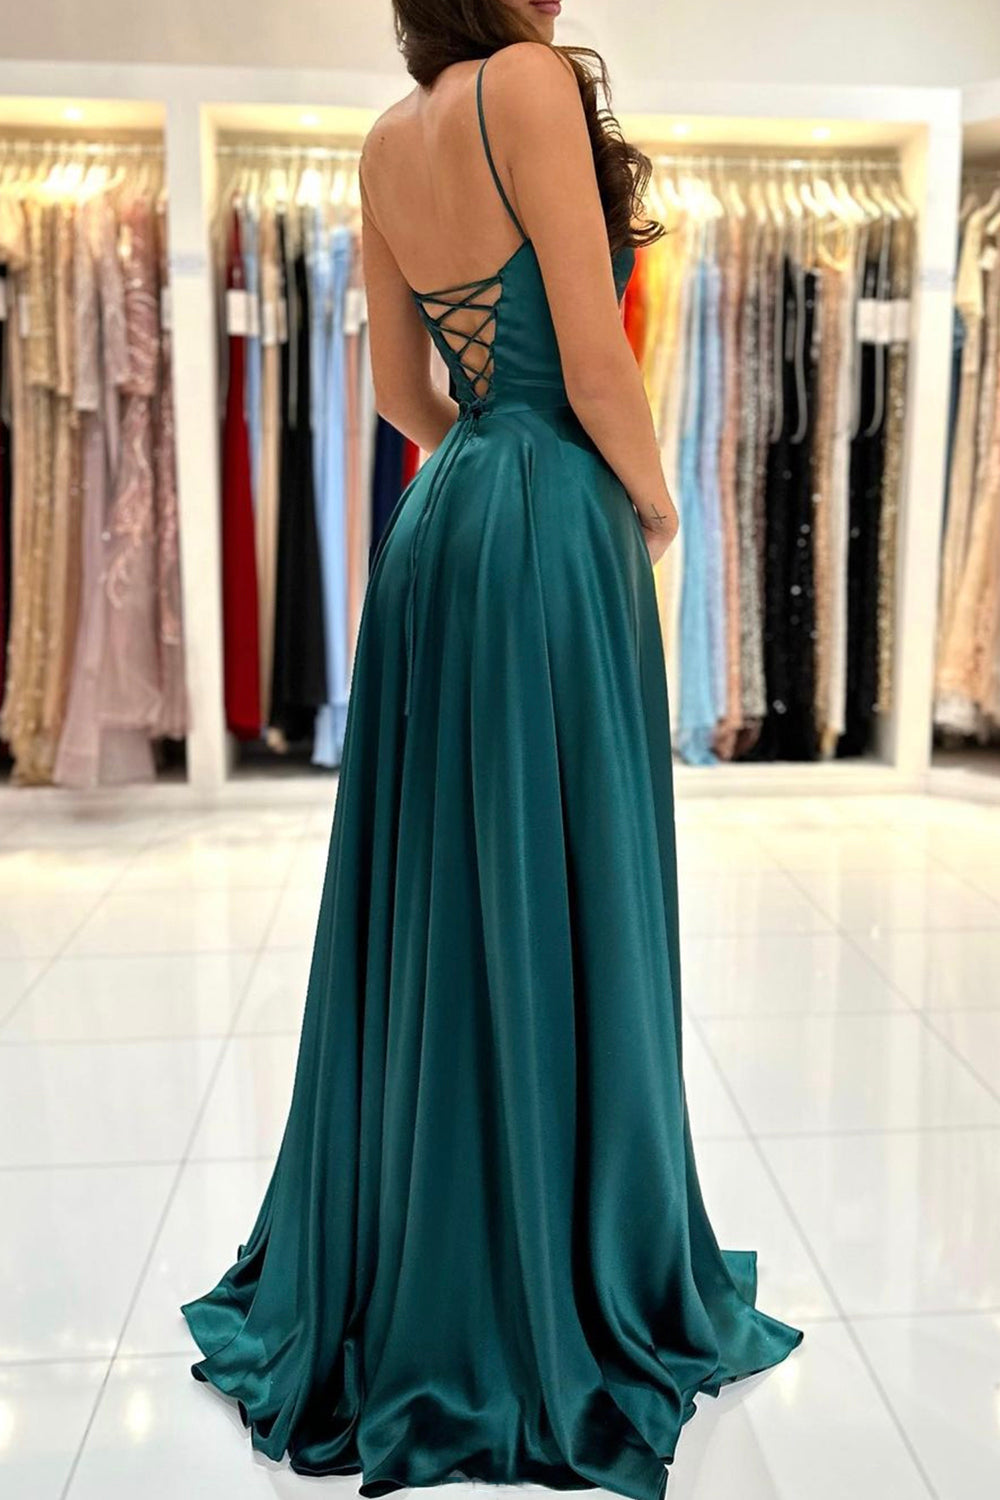 Green Satin Long Prom Dress, Simple A-Line Evening Dress with Slit